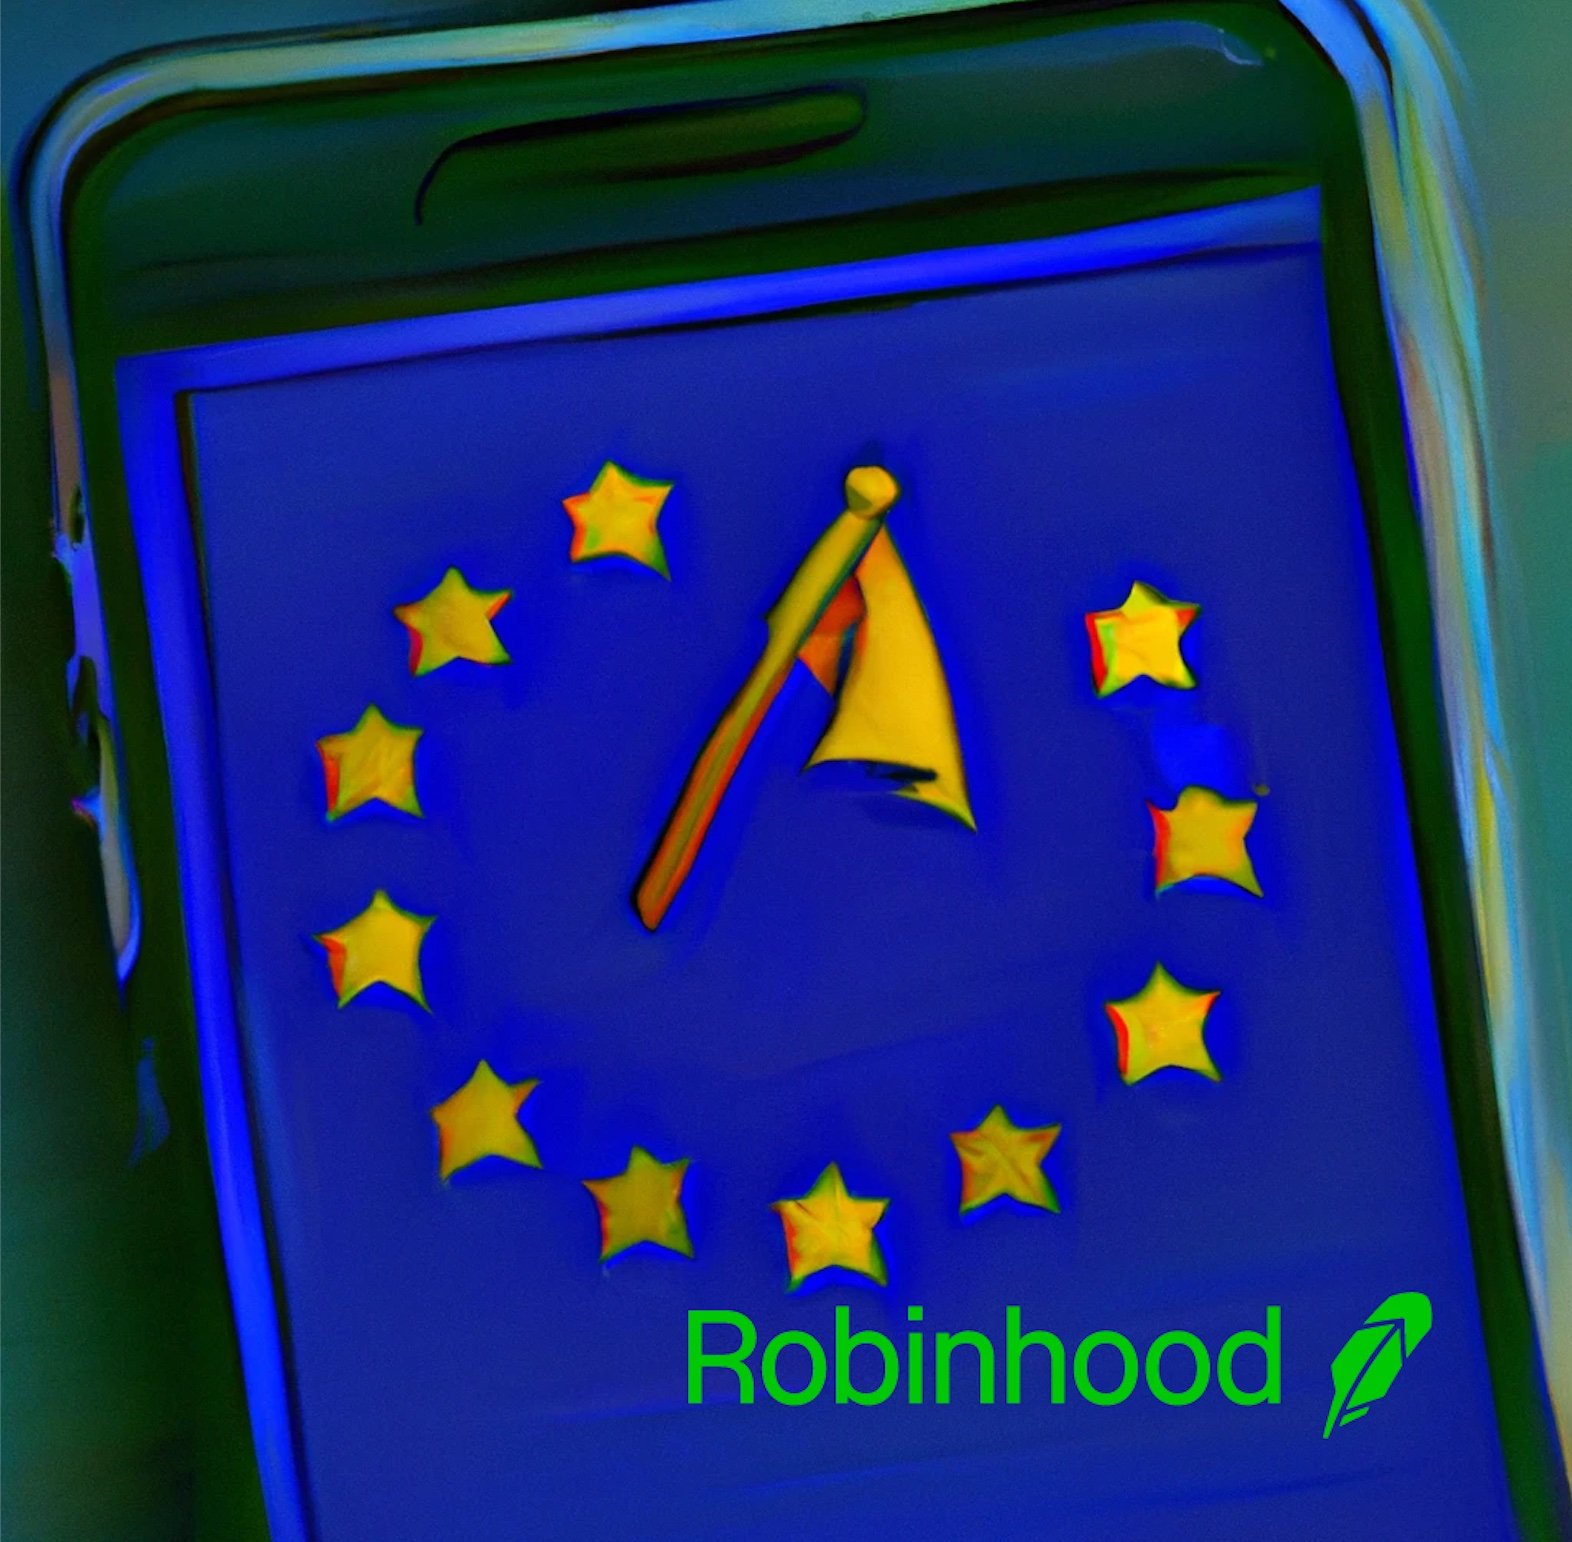 Robinhood on a smartphone with a European flag as the background